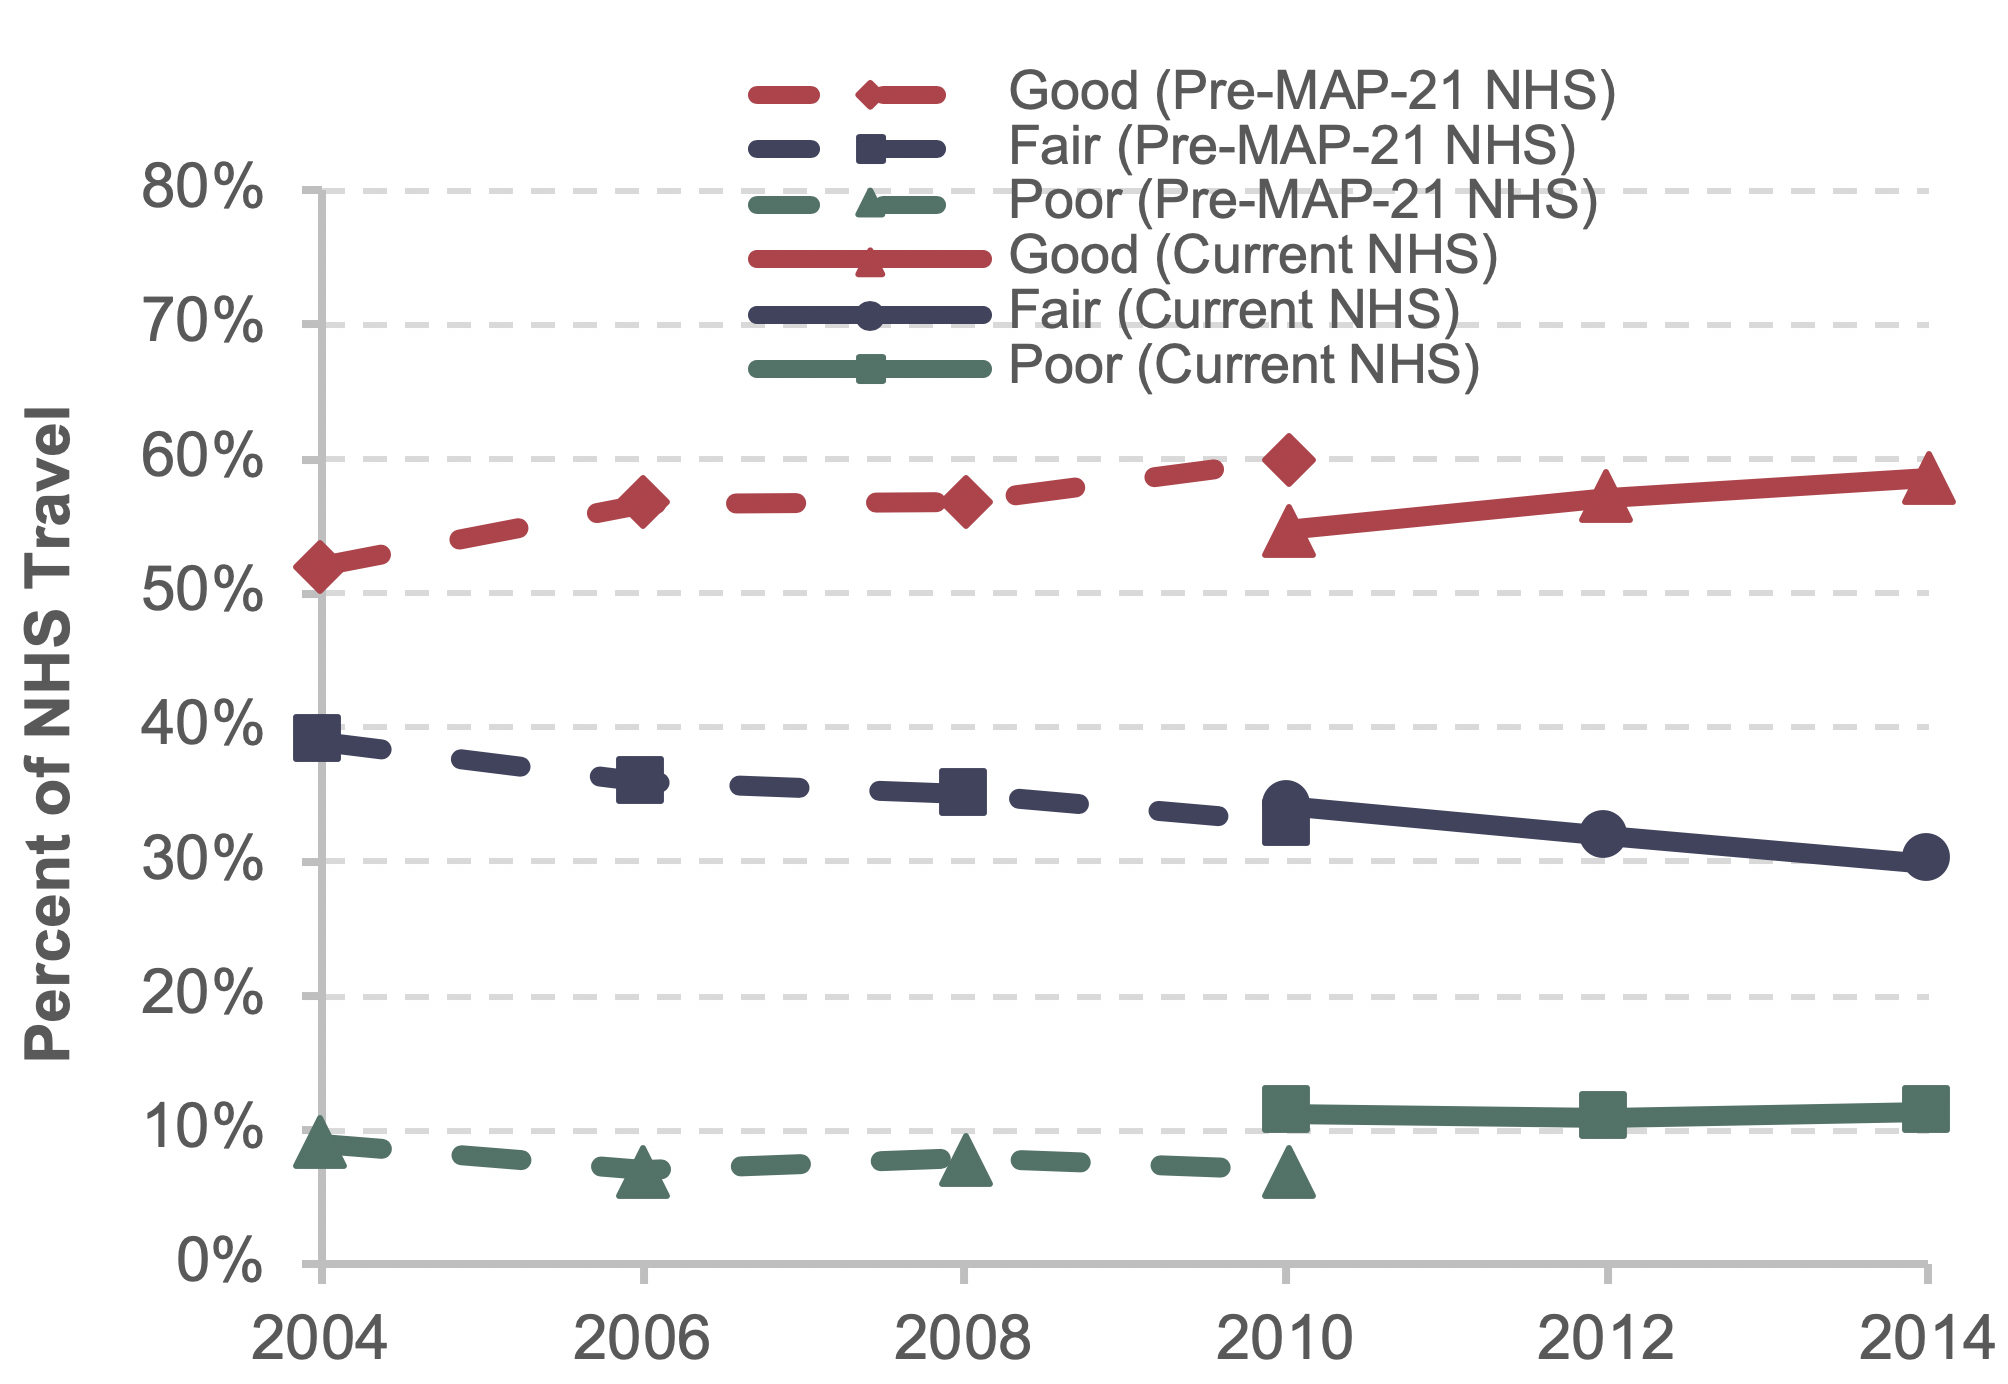 A line chart shows the percentage of travel on the NHS under different standards of ride quality from 2004 through 2014, with data on odd-numbered years omitted. For Pre-MAP-21 NHS VMT, the percentage of travel on pavements with good ride quality begins at 52 percent in 2004, increases to 57 percent in 2006, maintains that value in 2007, then increases to 60 percent in 2010; the percentage of travel on pavements with fair ride quality begins at 39 percent in 2004, decreases to 36 percent in 2006, to 35 percent in 2008, and to 33 percent in 2010; and the percentage of travel on pavements with poor ride quality begins at 9 percent in 2004, decreases to 7 percent in 2006, increases to 8 percent in 2008, then decreases to 7 percent in 2010. For current NHS VMT, the percentage of travel on pavements with good ride quality begins at 55 percent in 2010, increases to 57 percent in 2012 and to 59 percent in 2014; the percentage of travel on pavements with fair ride quality begins at 34 percent in 2010, decreases to 32 percent in 2012, and to 30 percent in 2014; and the percentage of travel on pavements with poor ride quality begins at 11 percent in 2010, and maintains this value through 2014. Source: Highway Performance Monitoring System.